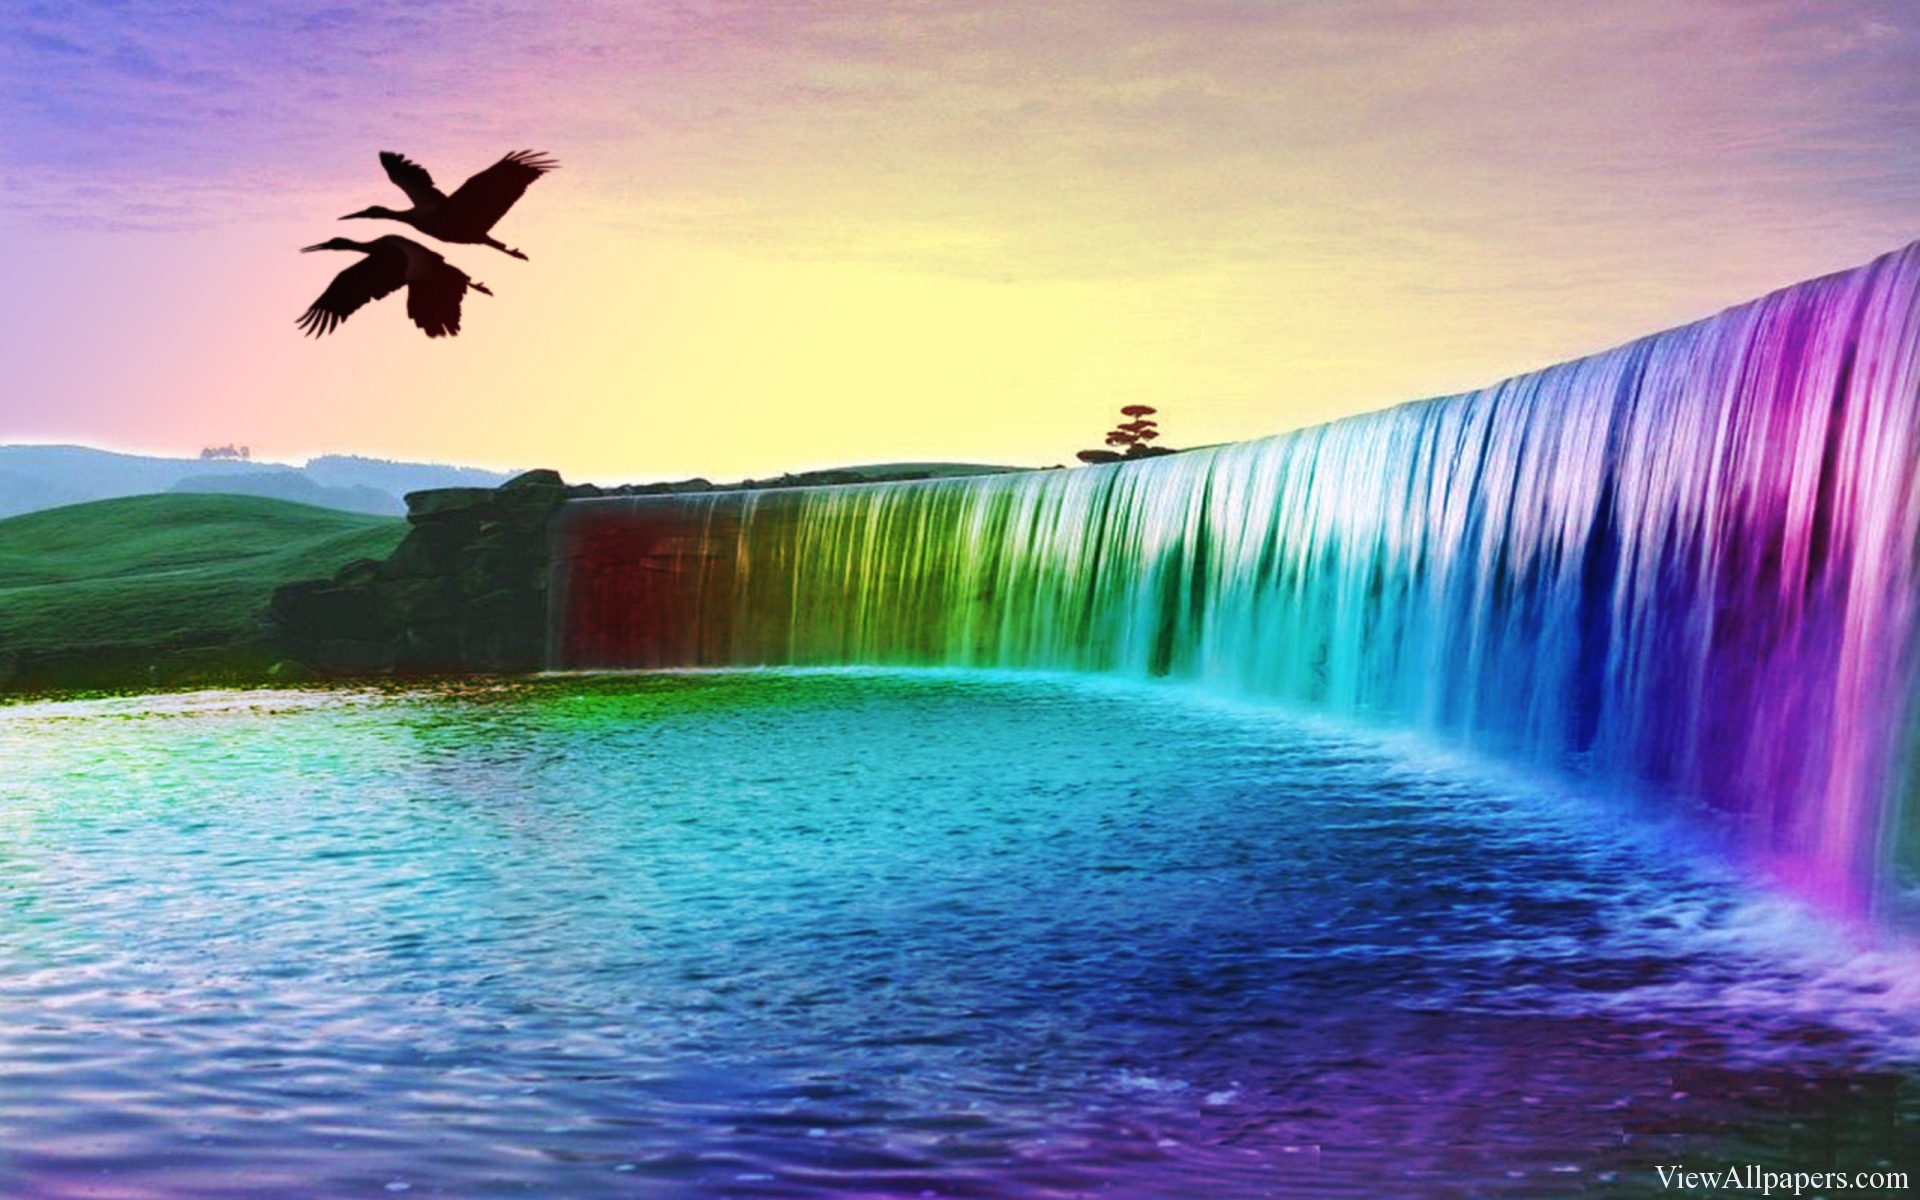  Colorful Waterfall Desktop Background For PC computers desktop